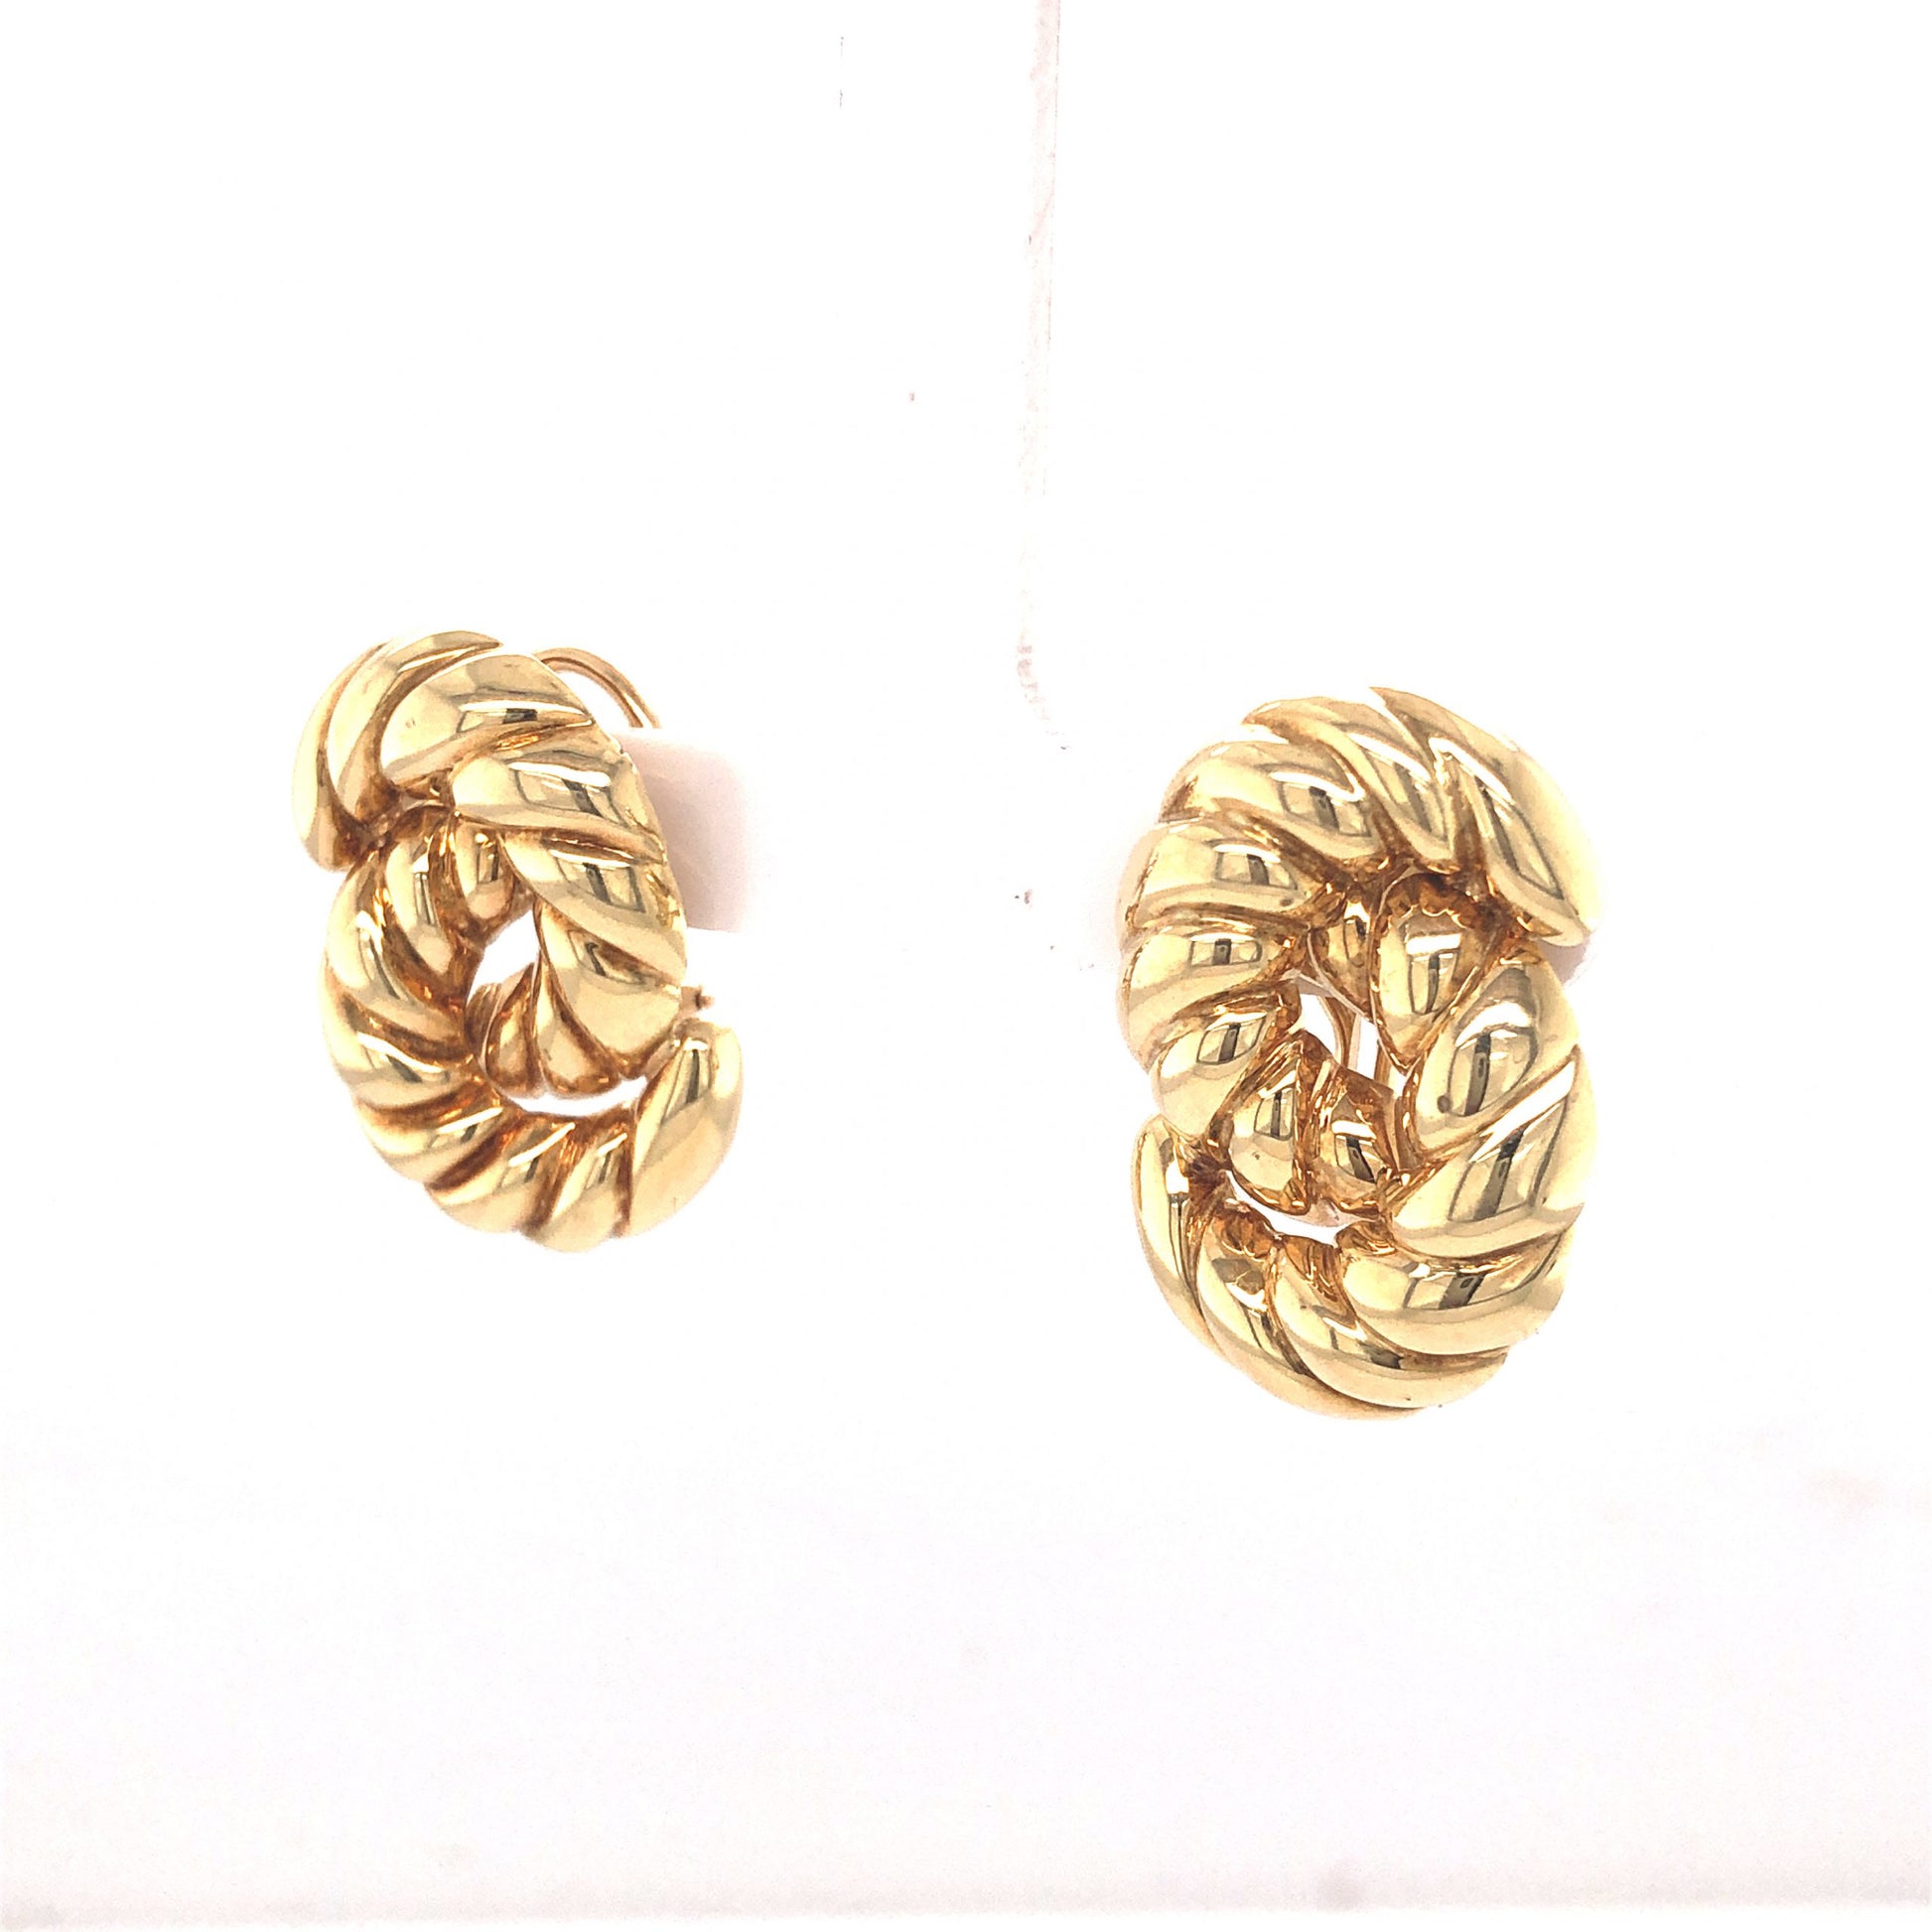 Rope Knot Stud Earrings in 14k Yellow GoldComposition: 14 Karat Yellow GoldTotal Gram Weight: 14.9 g